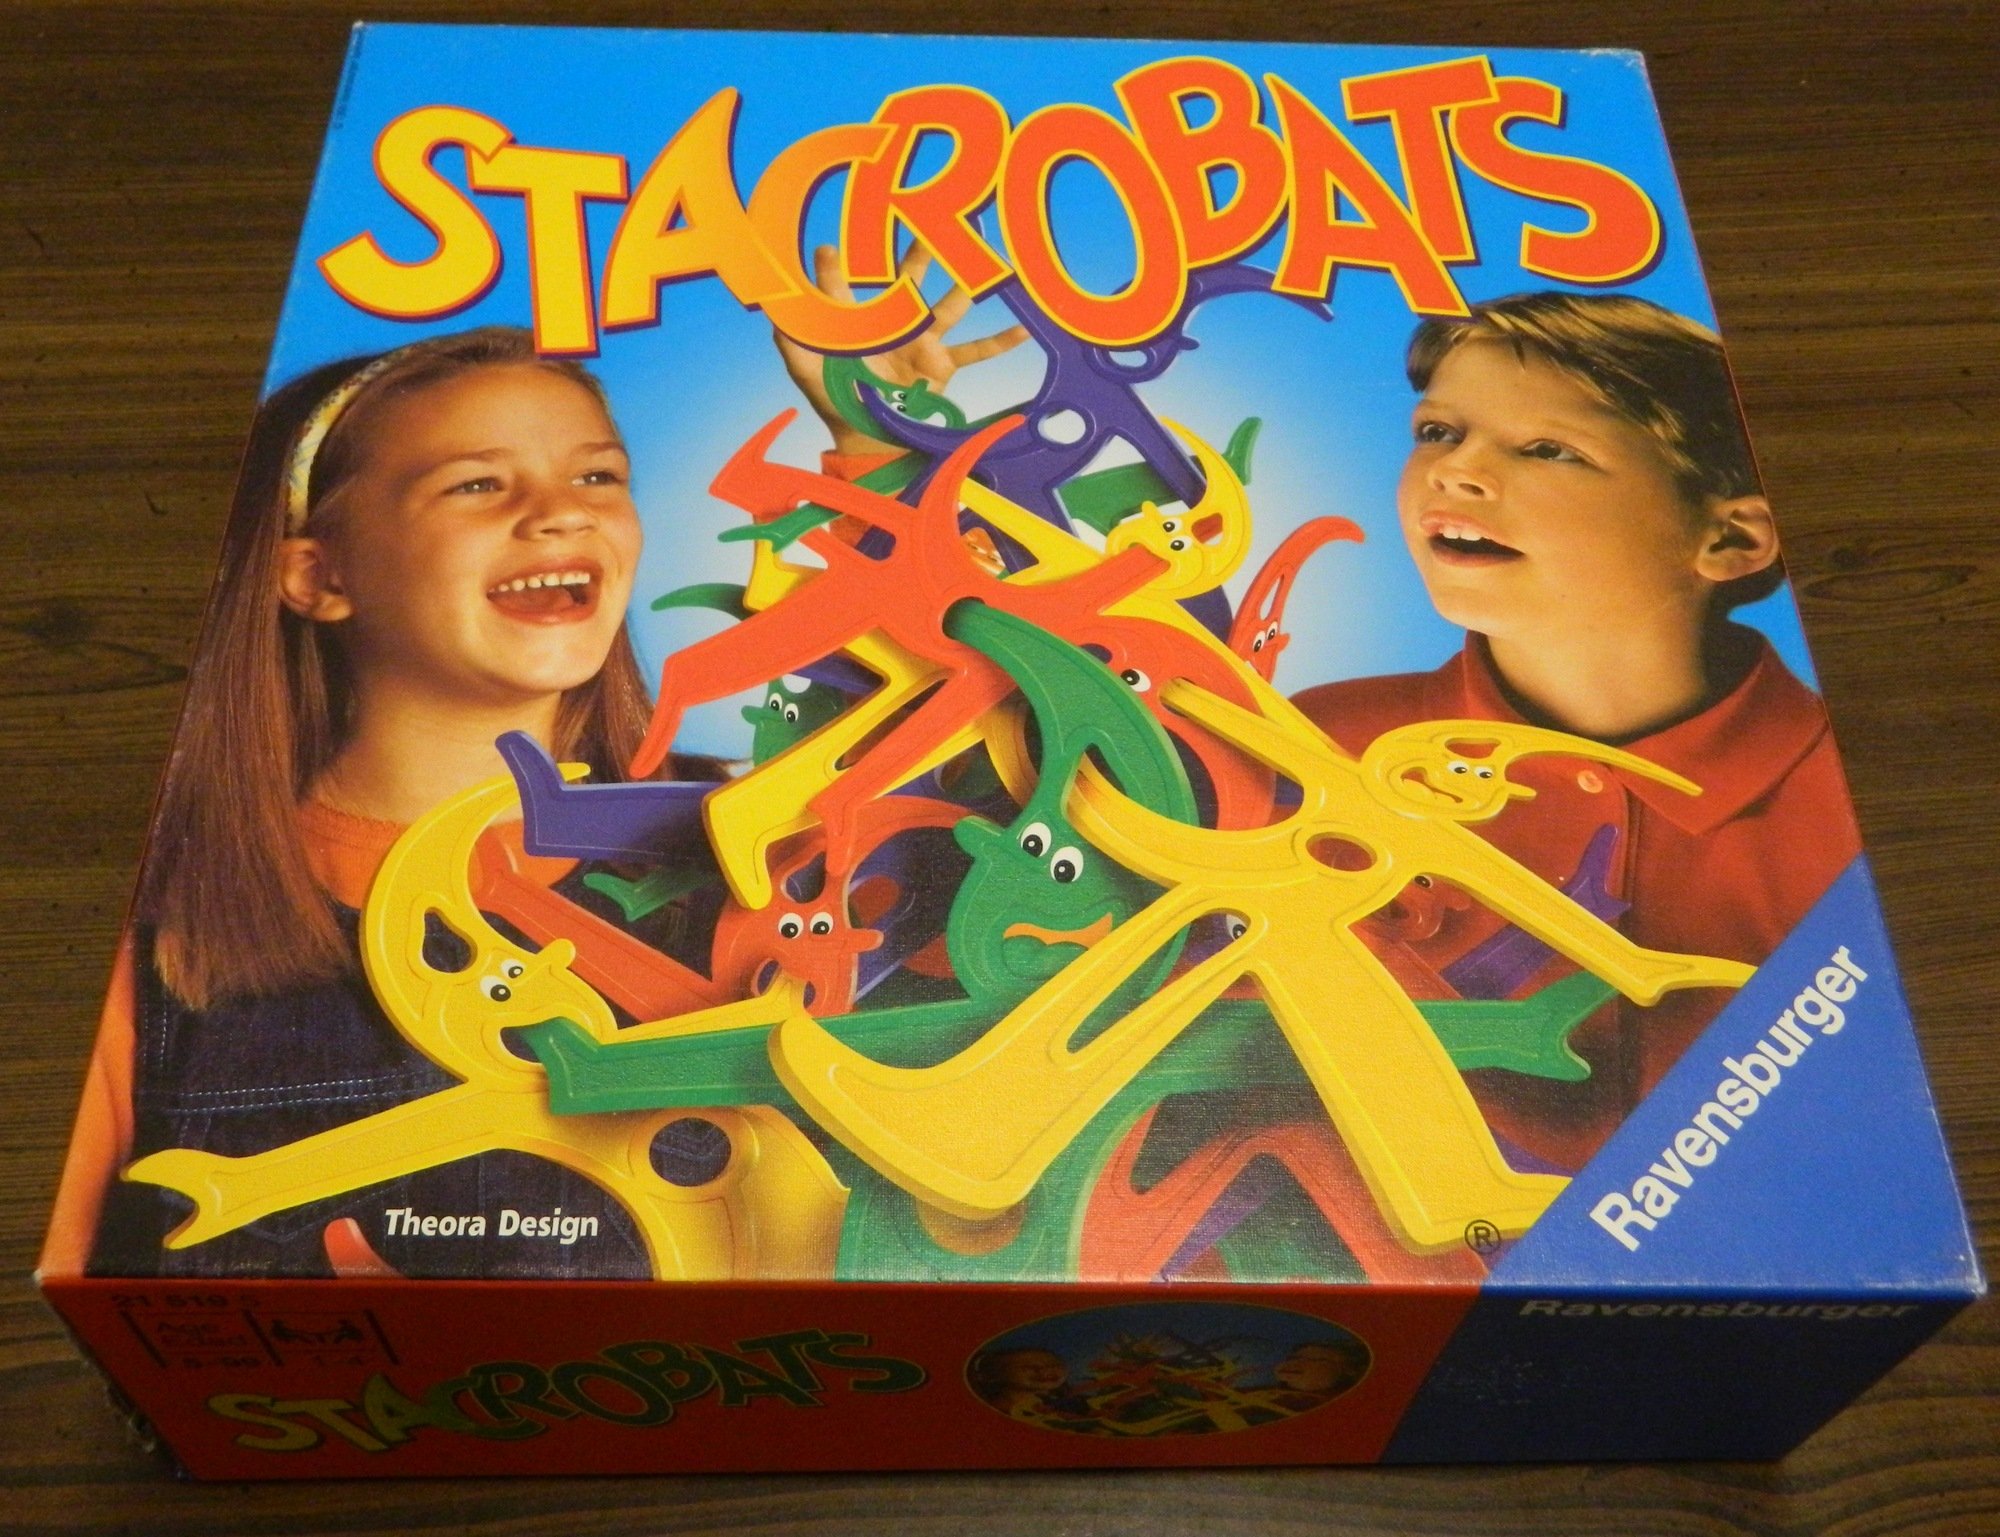 Stacrobats Board Game Review and Rules